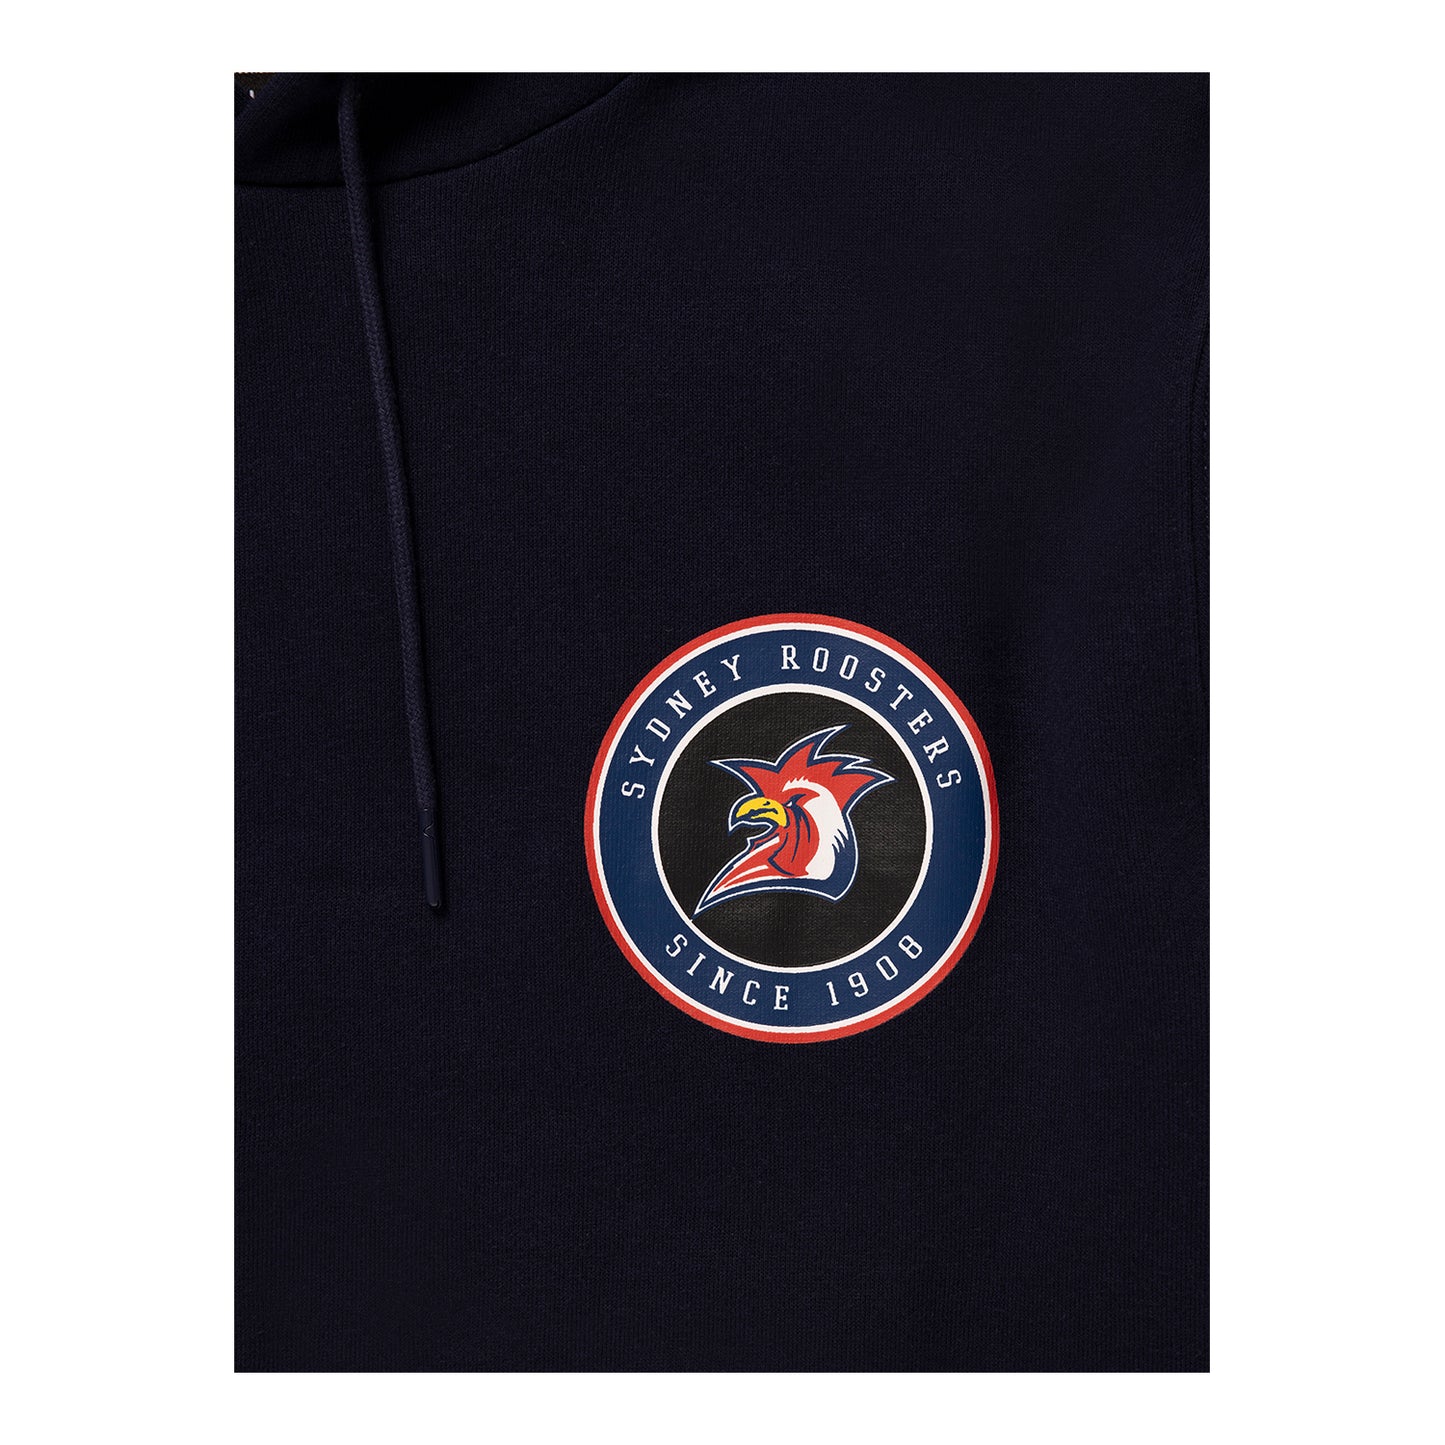 Sydney Roosters Mens Supporter Hoodie